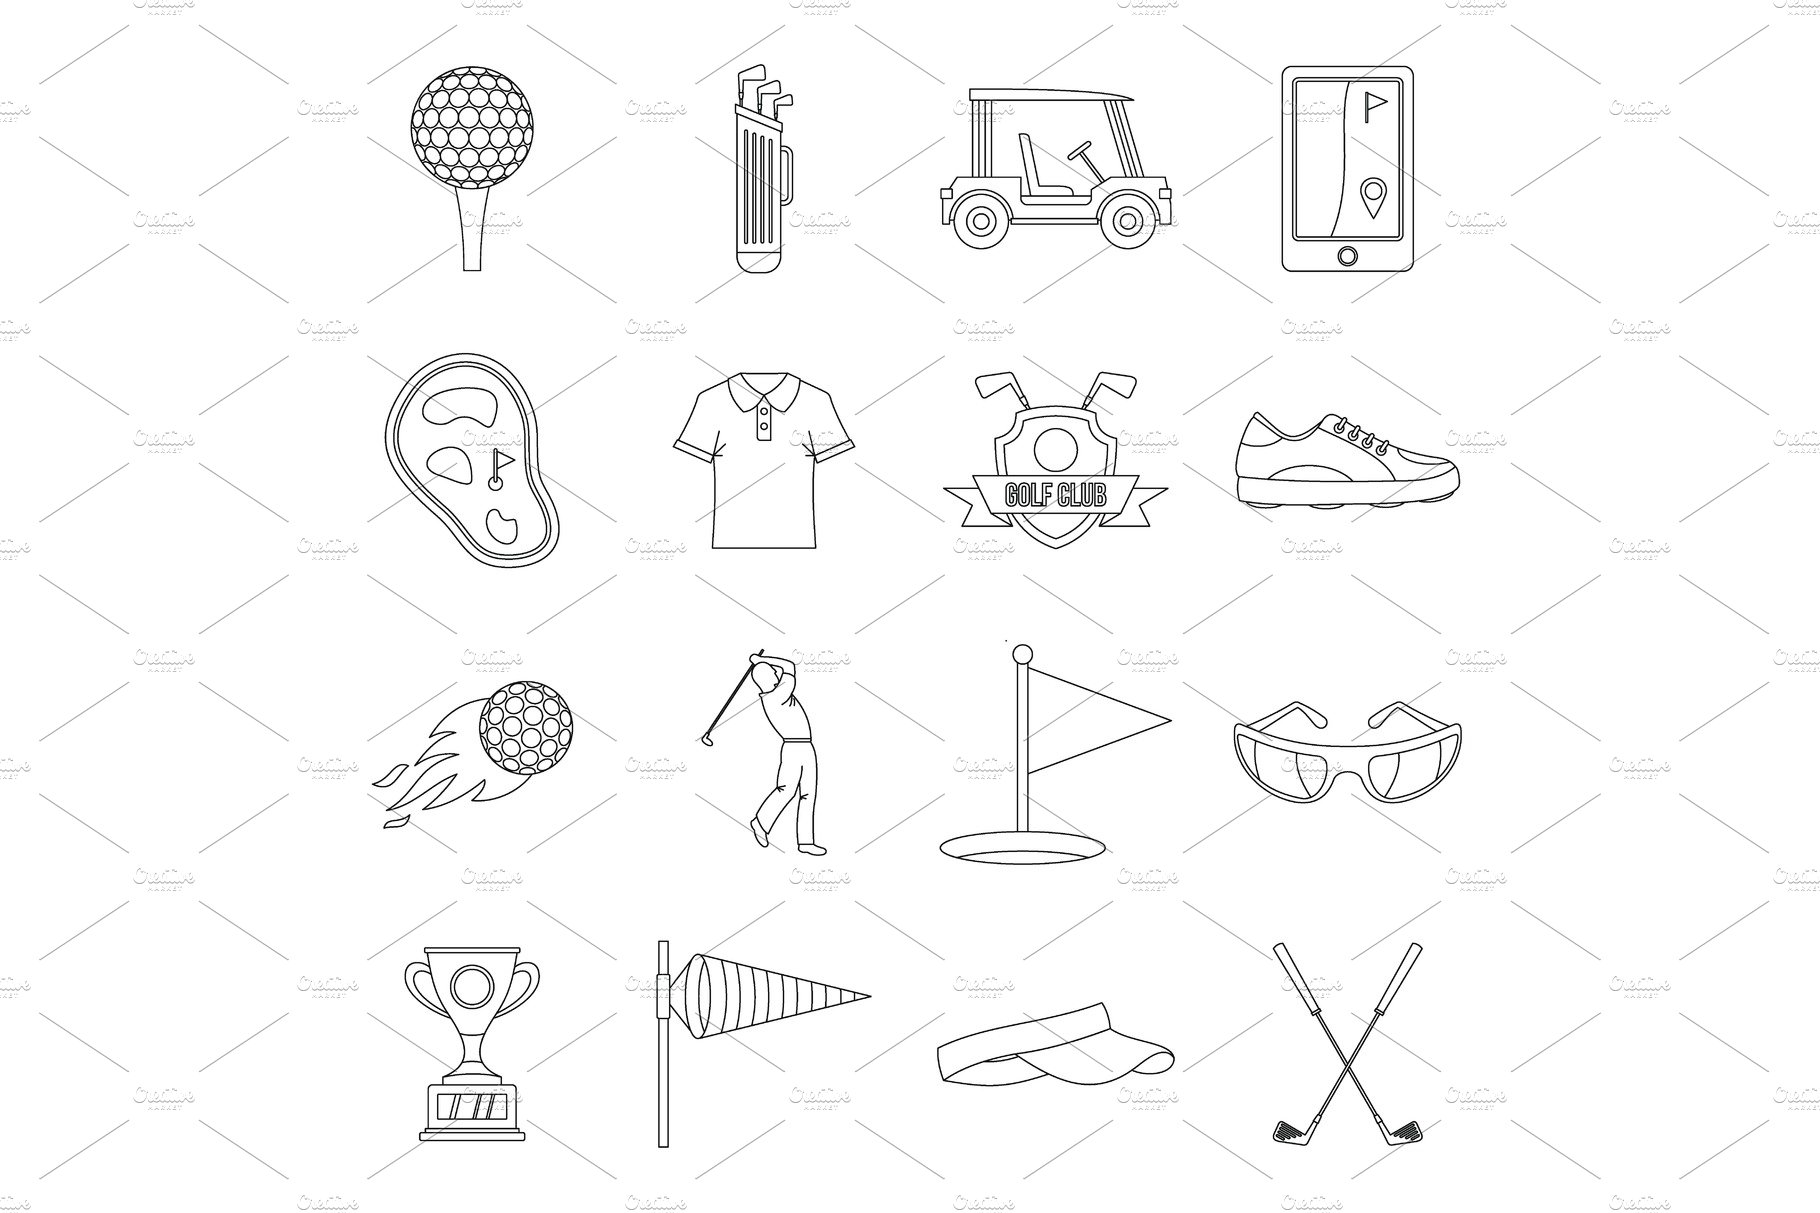 Golf items icons set, outline style cover image.